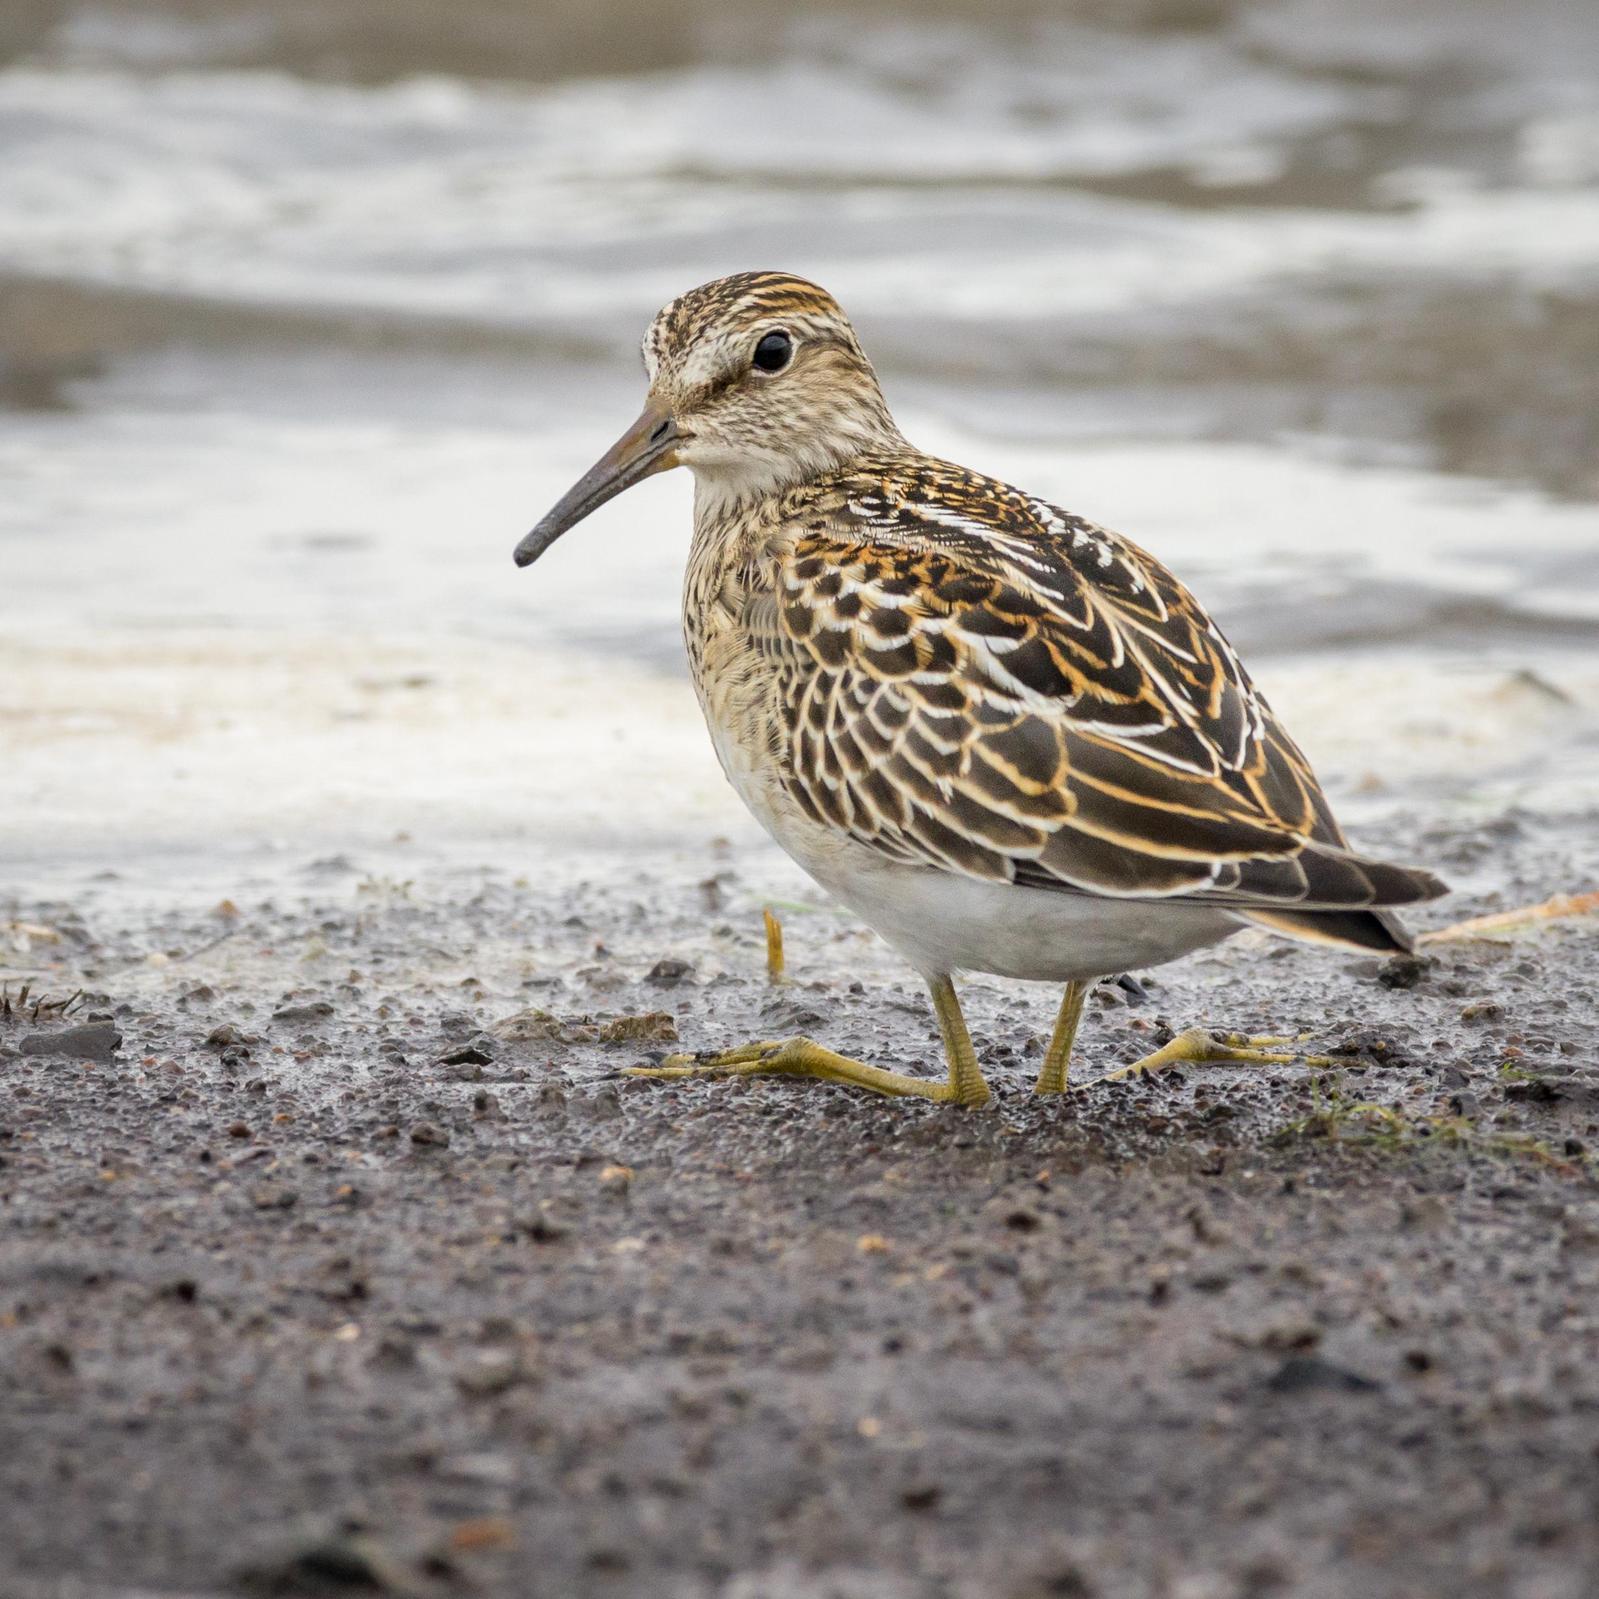 Pectoral Sandpiper Photo by Jesse Hodges